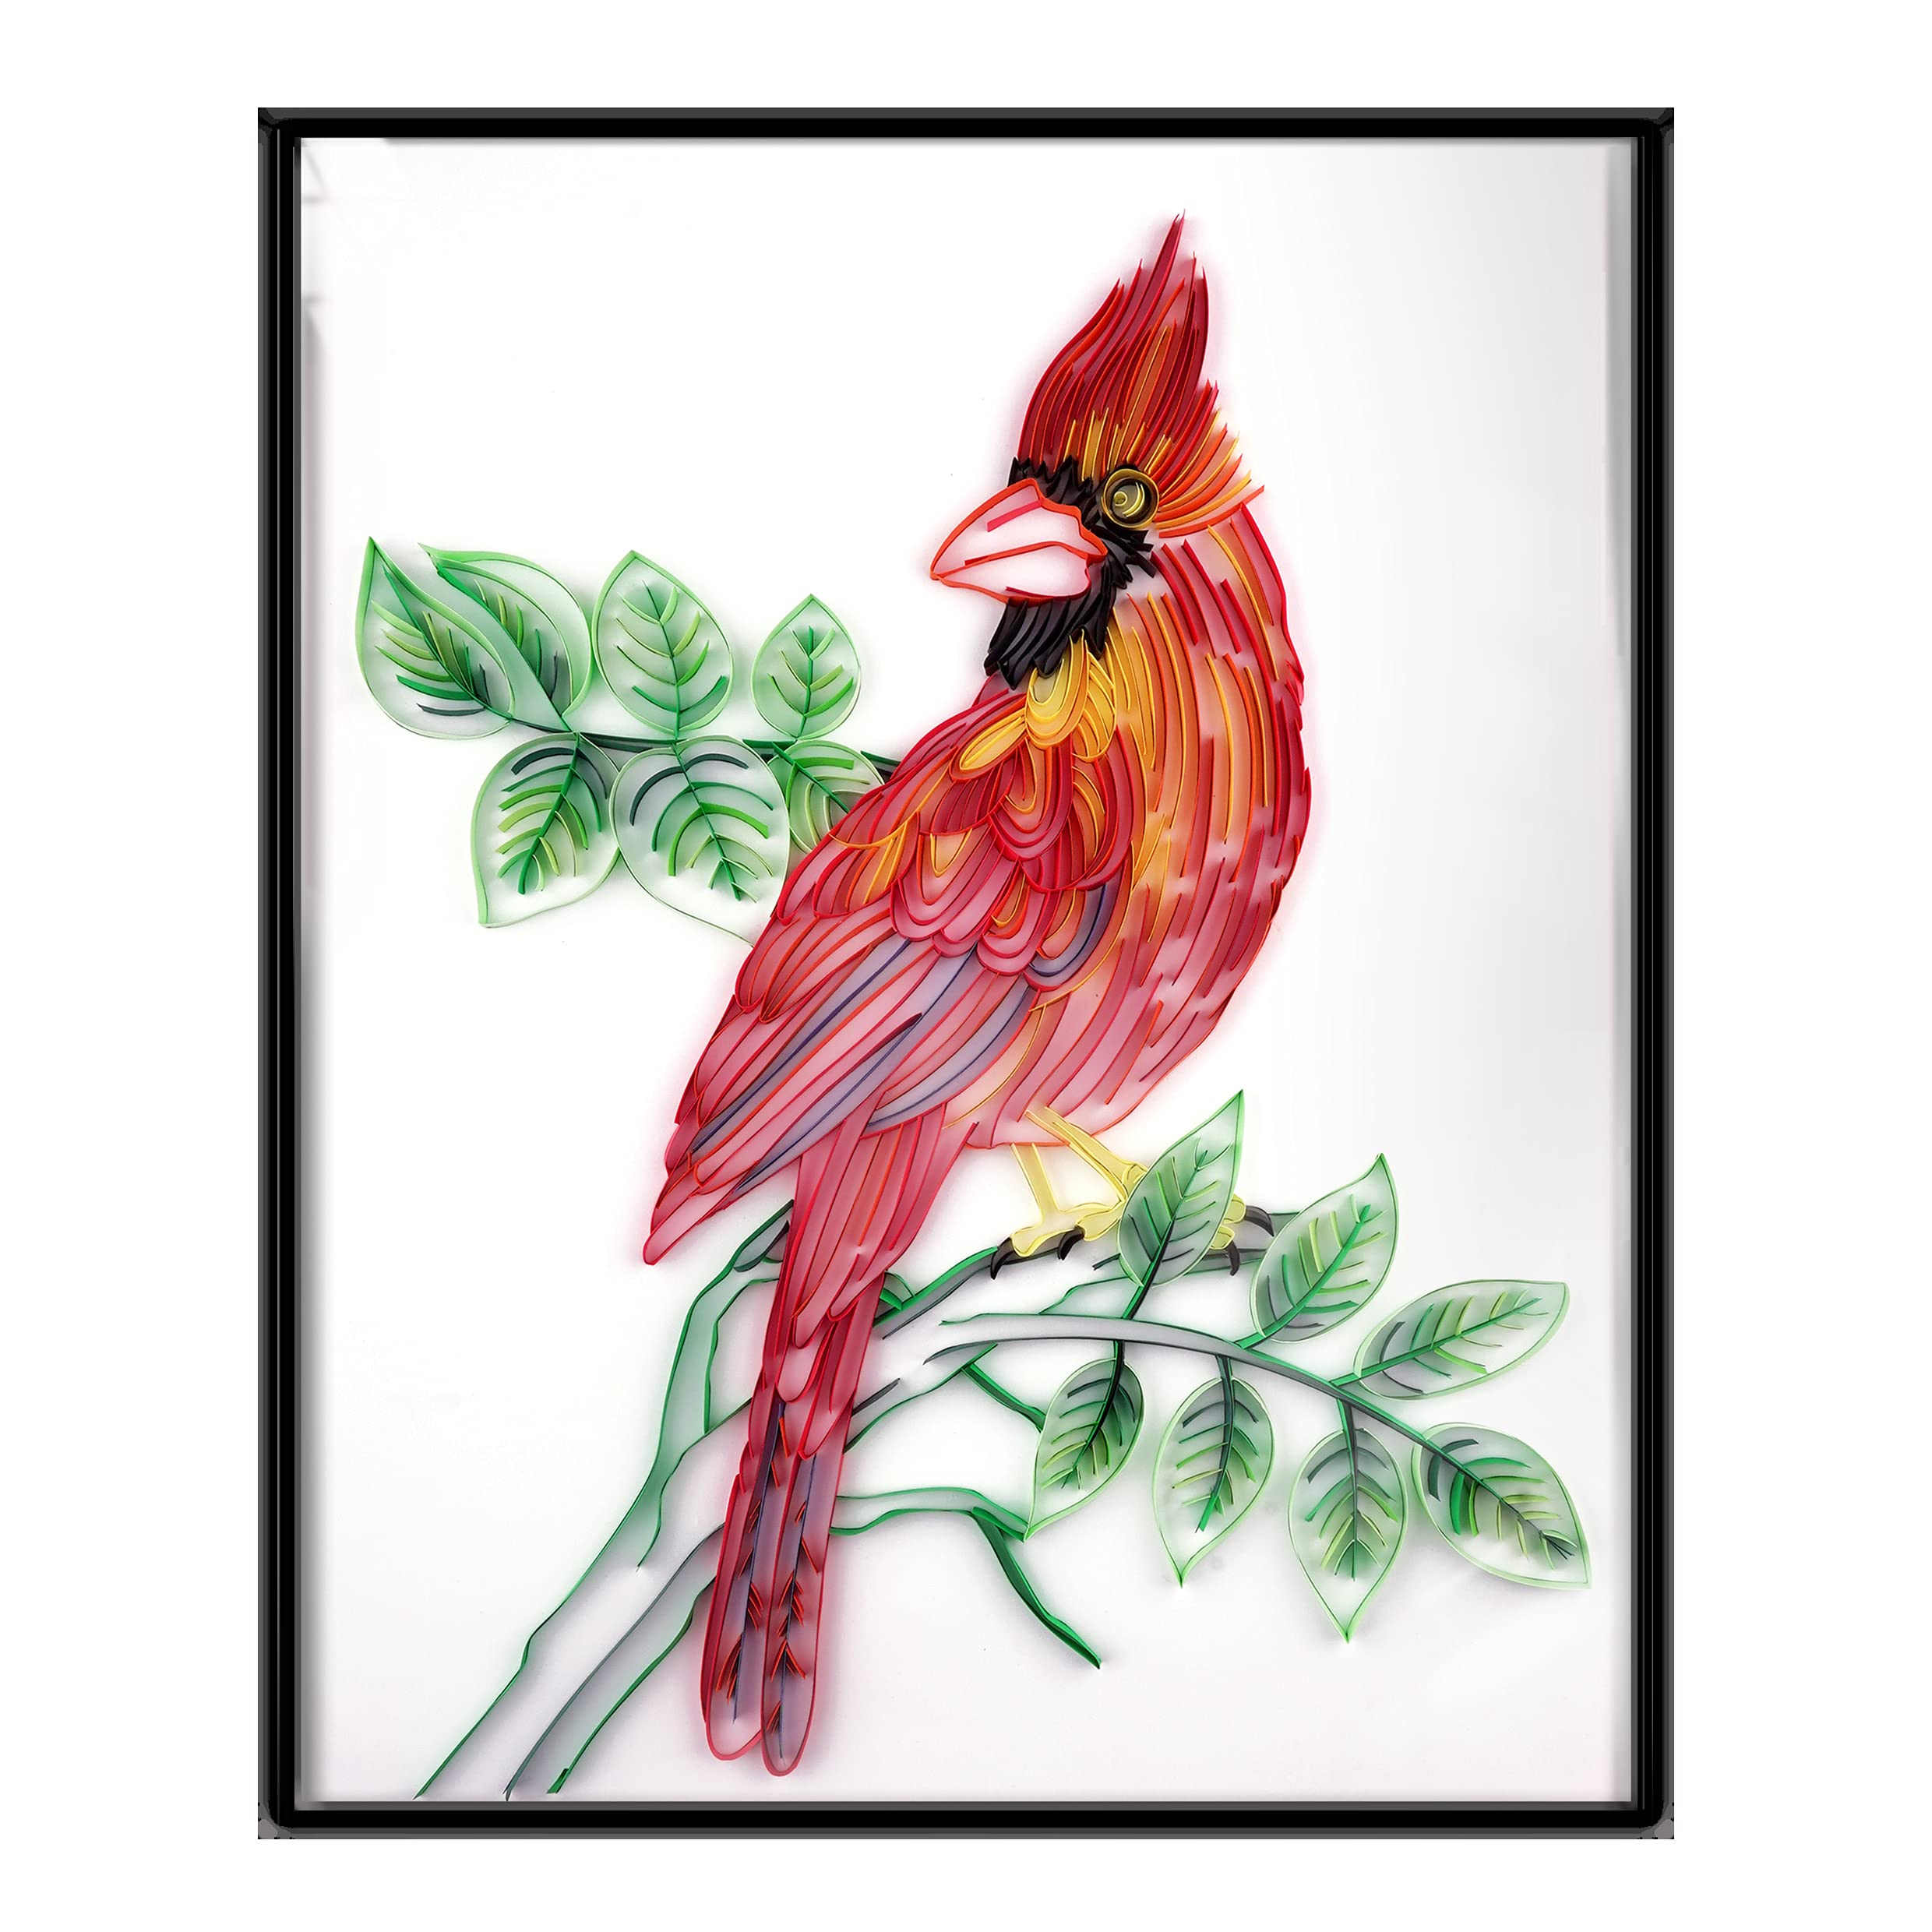 Uniquilling Quilling Paper Quilling Kit for Adults Beginner 16*20-inch  Northern Cardinal Exquisite DIY Paper Filigree Painting Kits Quilling Tools  Home Room Wall Art Decor Best Gifts(Basic)